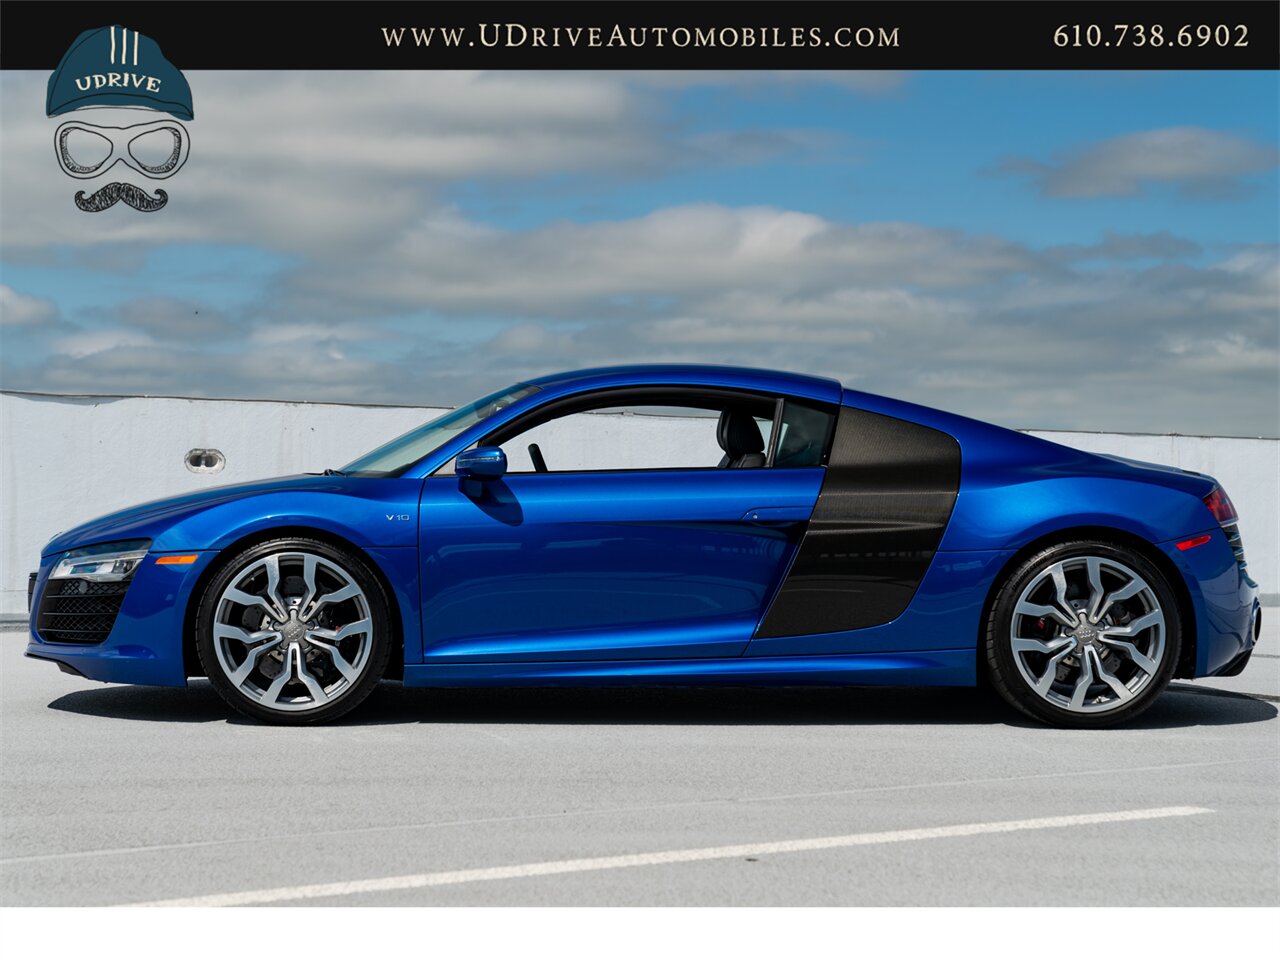 2015 Audi R8 5.2 V10 Quattro 6 Speed Manual 10k Miles  Diamond Stitched Leather 1 of 2 - Photo 8 - West Chester, PA 19382